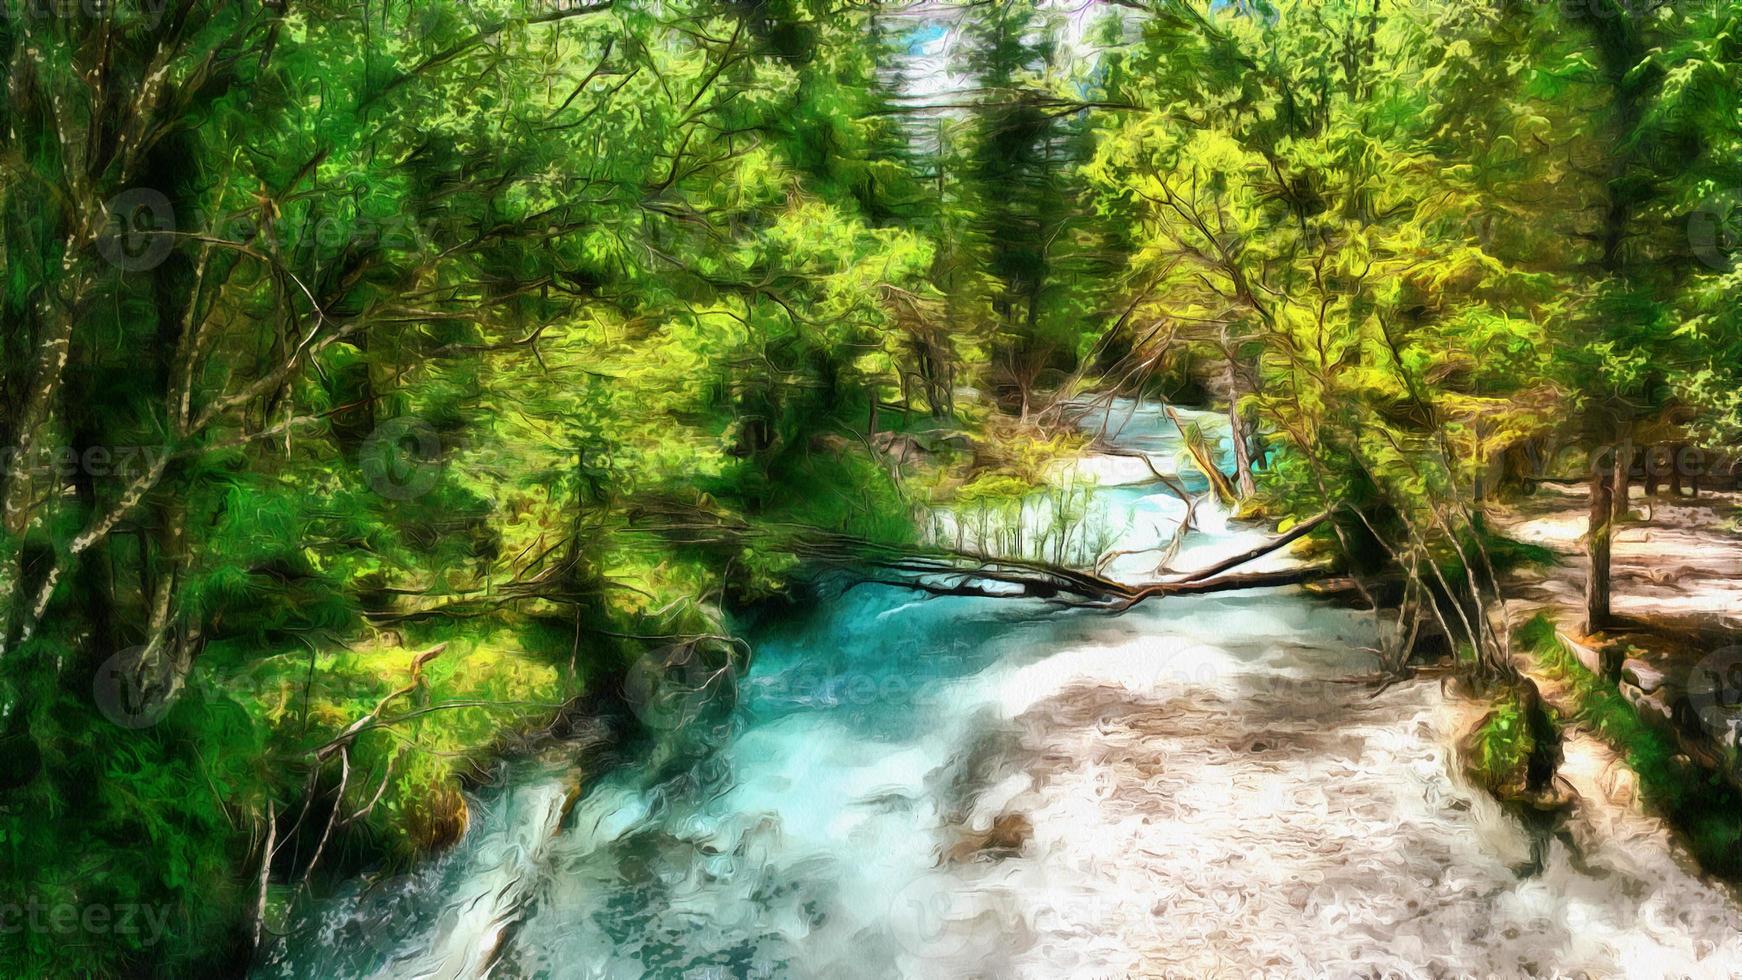 The works in the style of watercolor painting. Fast river in the photo